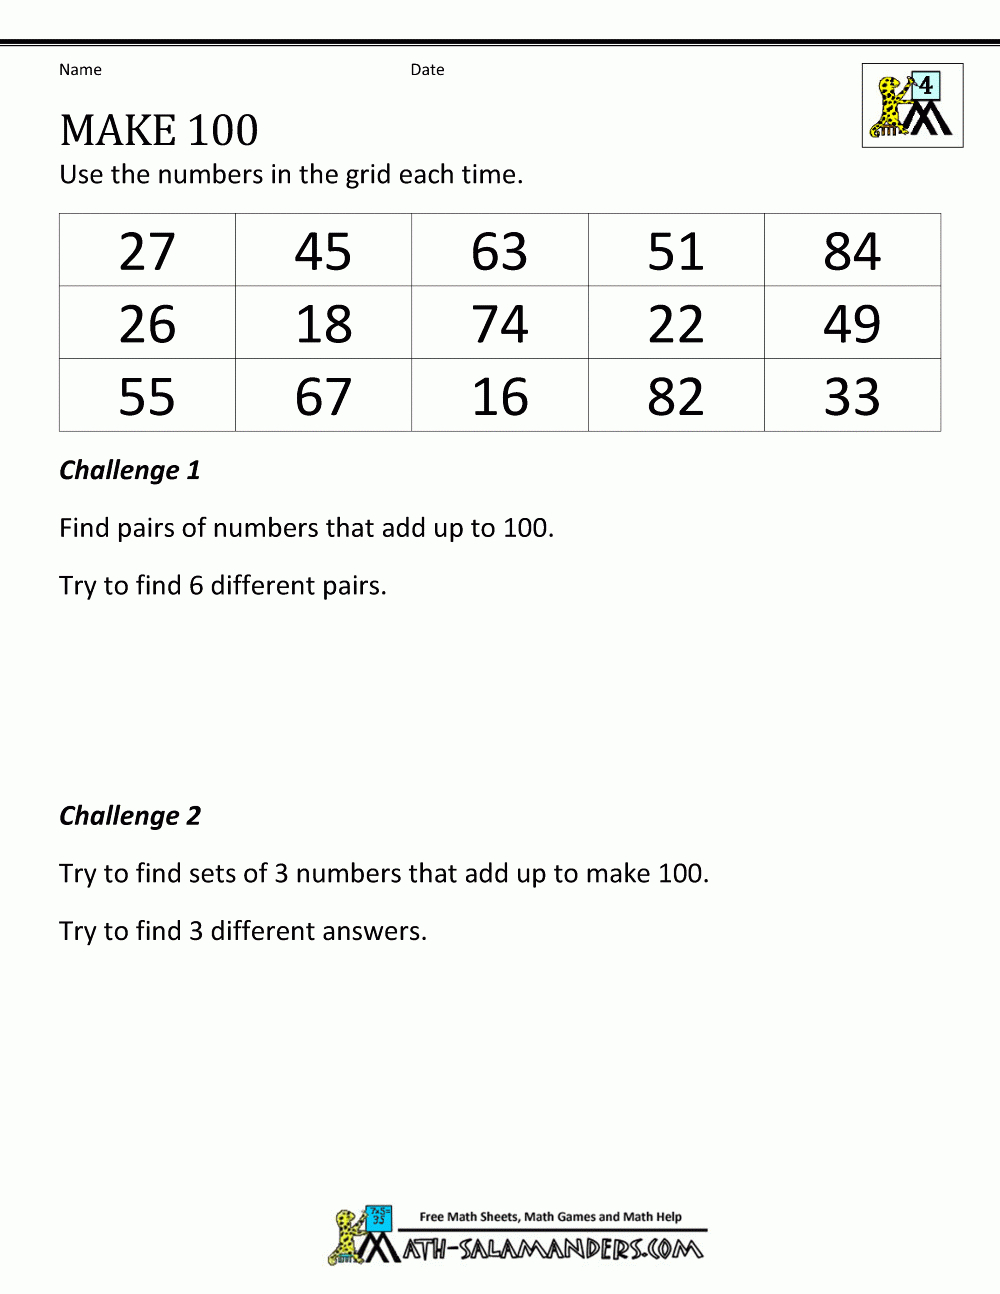 Math Puzzles Printable Make 100 Puzzle | Math Puzzles | Maths - Printable Puzzle Worksheets For Grade 1